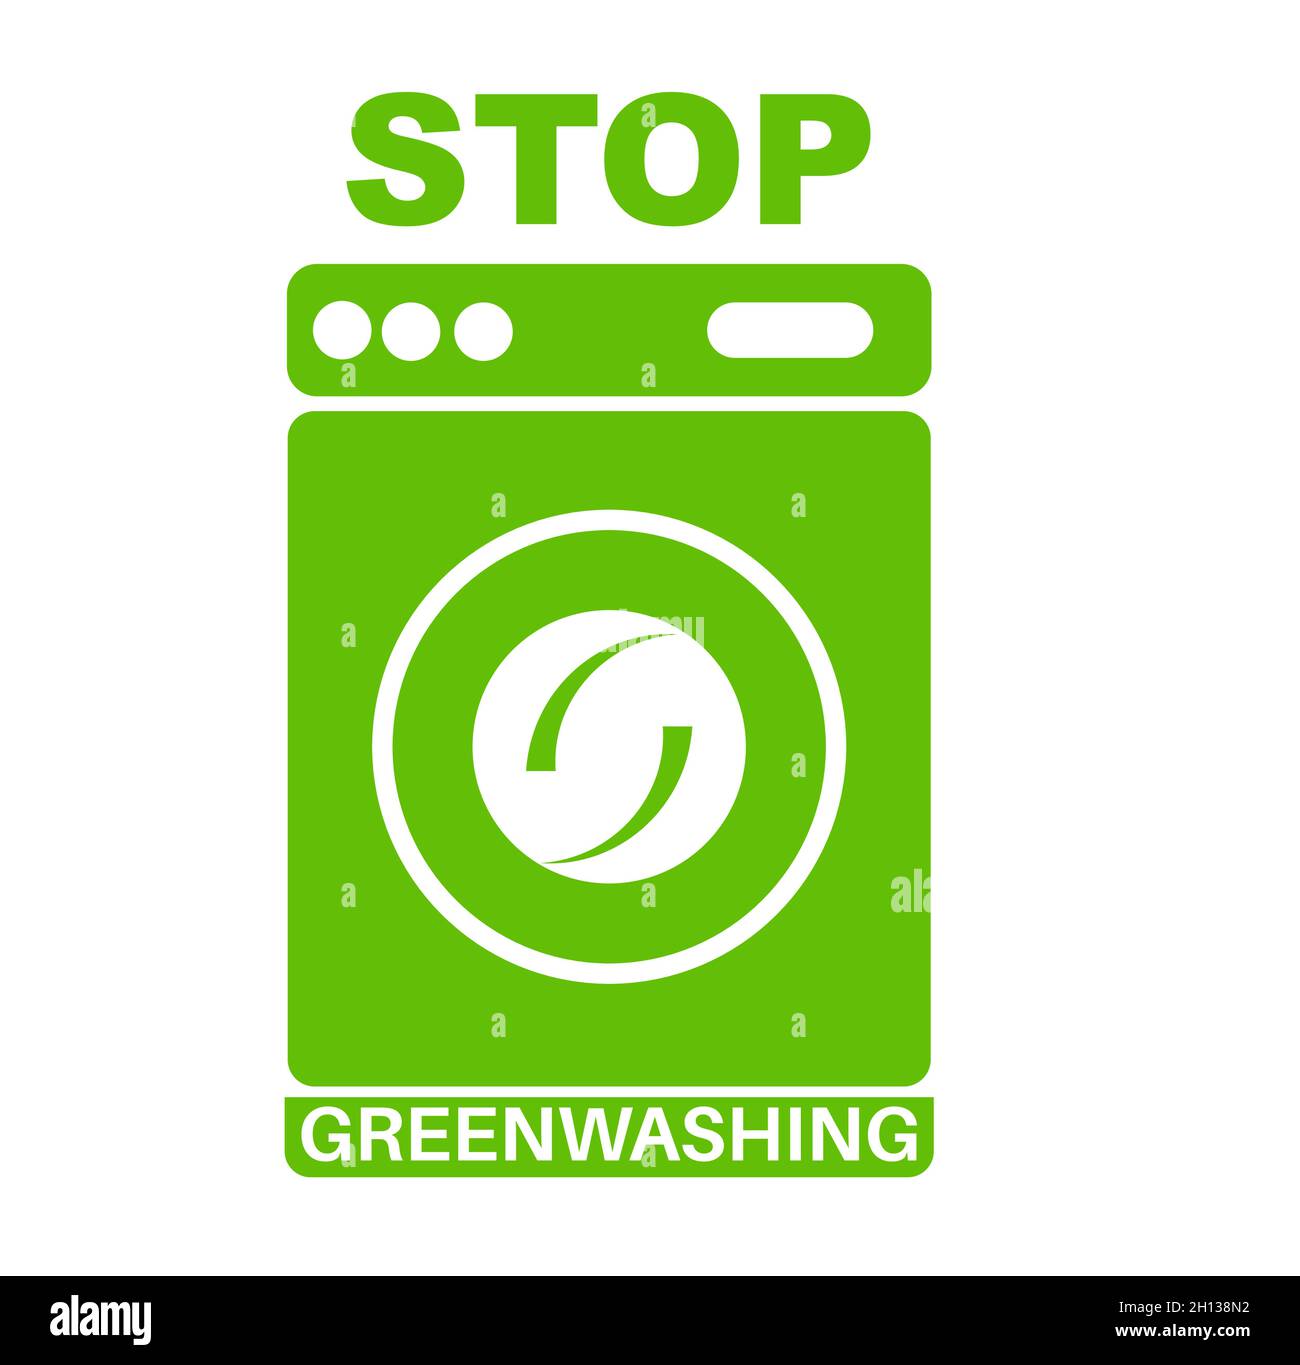 Greenwashing consept vector illustration on a white background Stock Vector